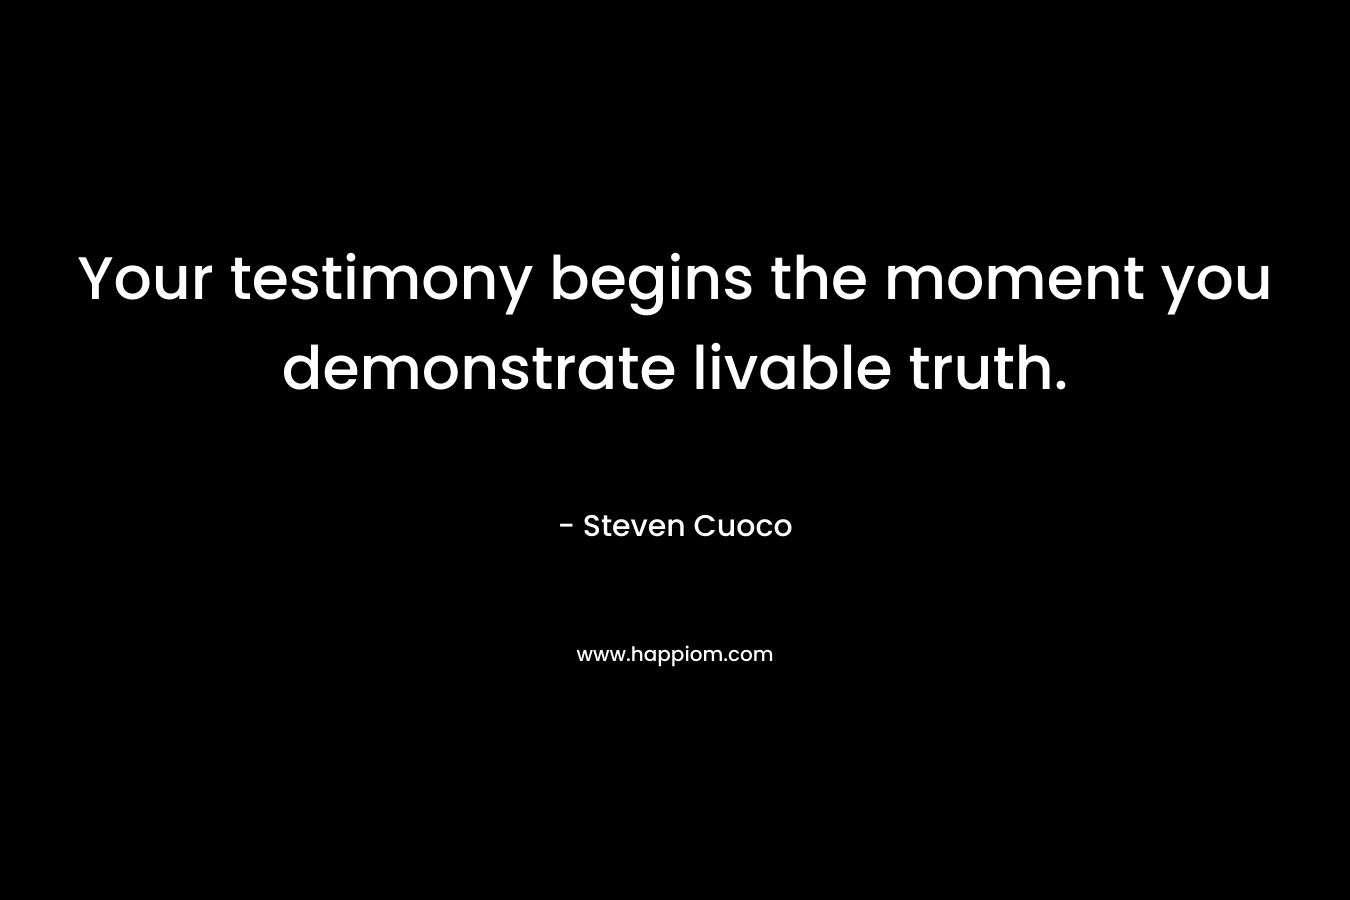 Your testimony begins the moment you demonstrate livable truth. – Steven Cuoco